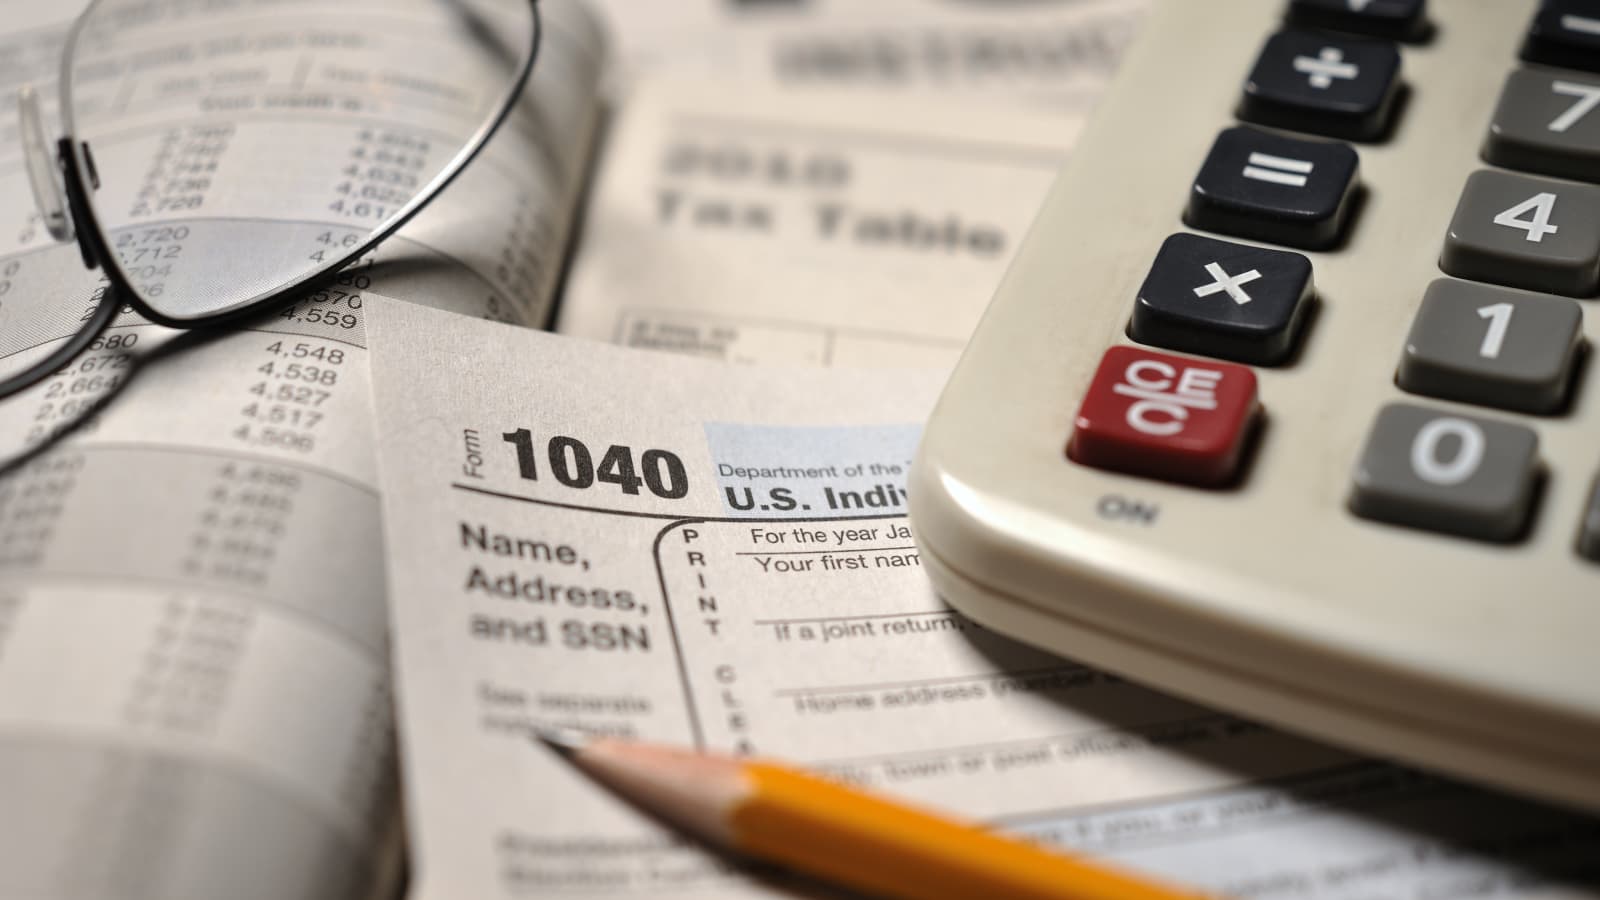 Here's when your tax return could spark interest from the IRS